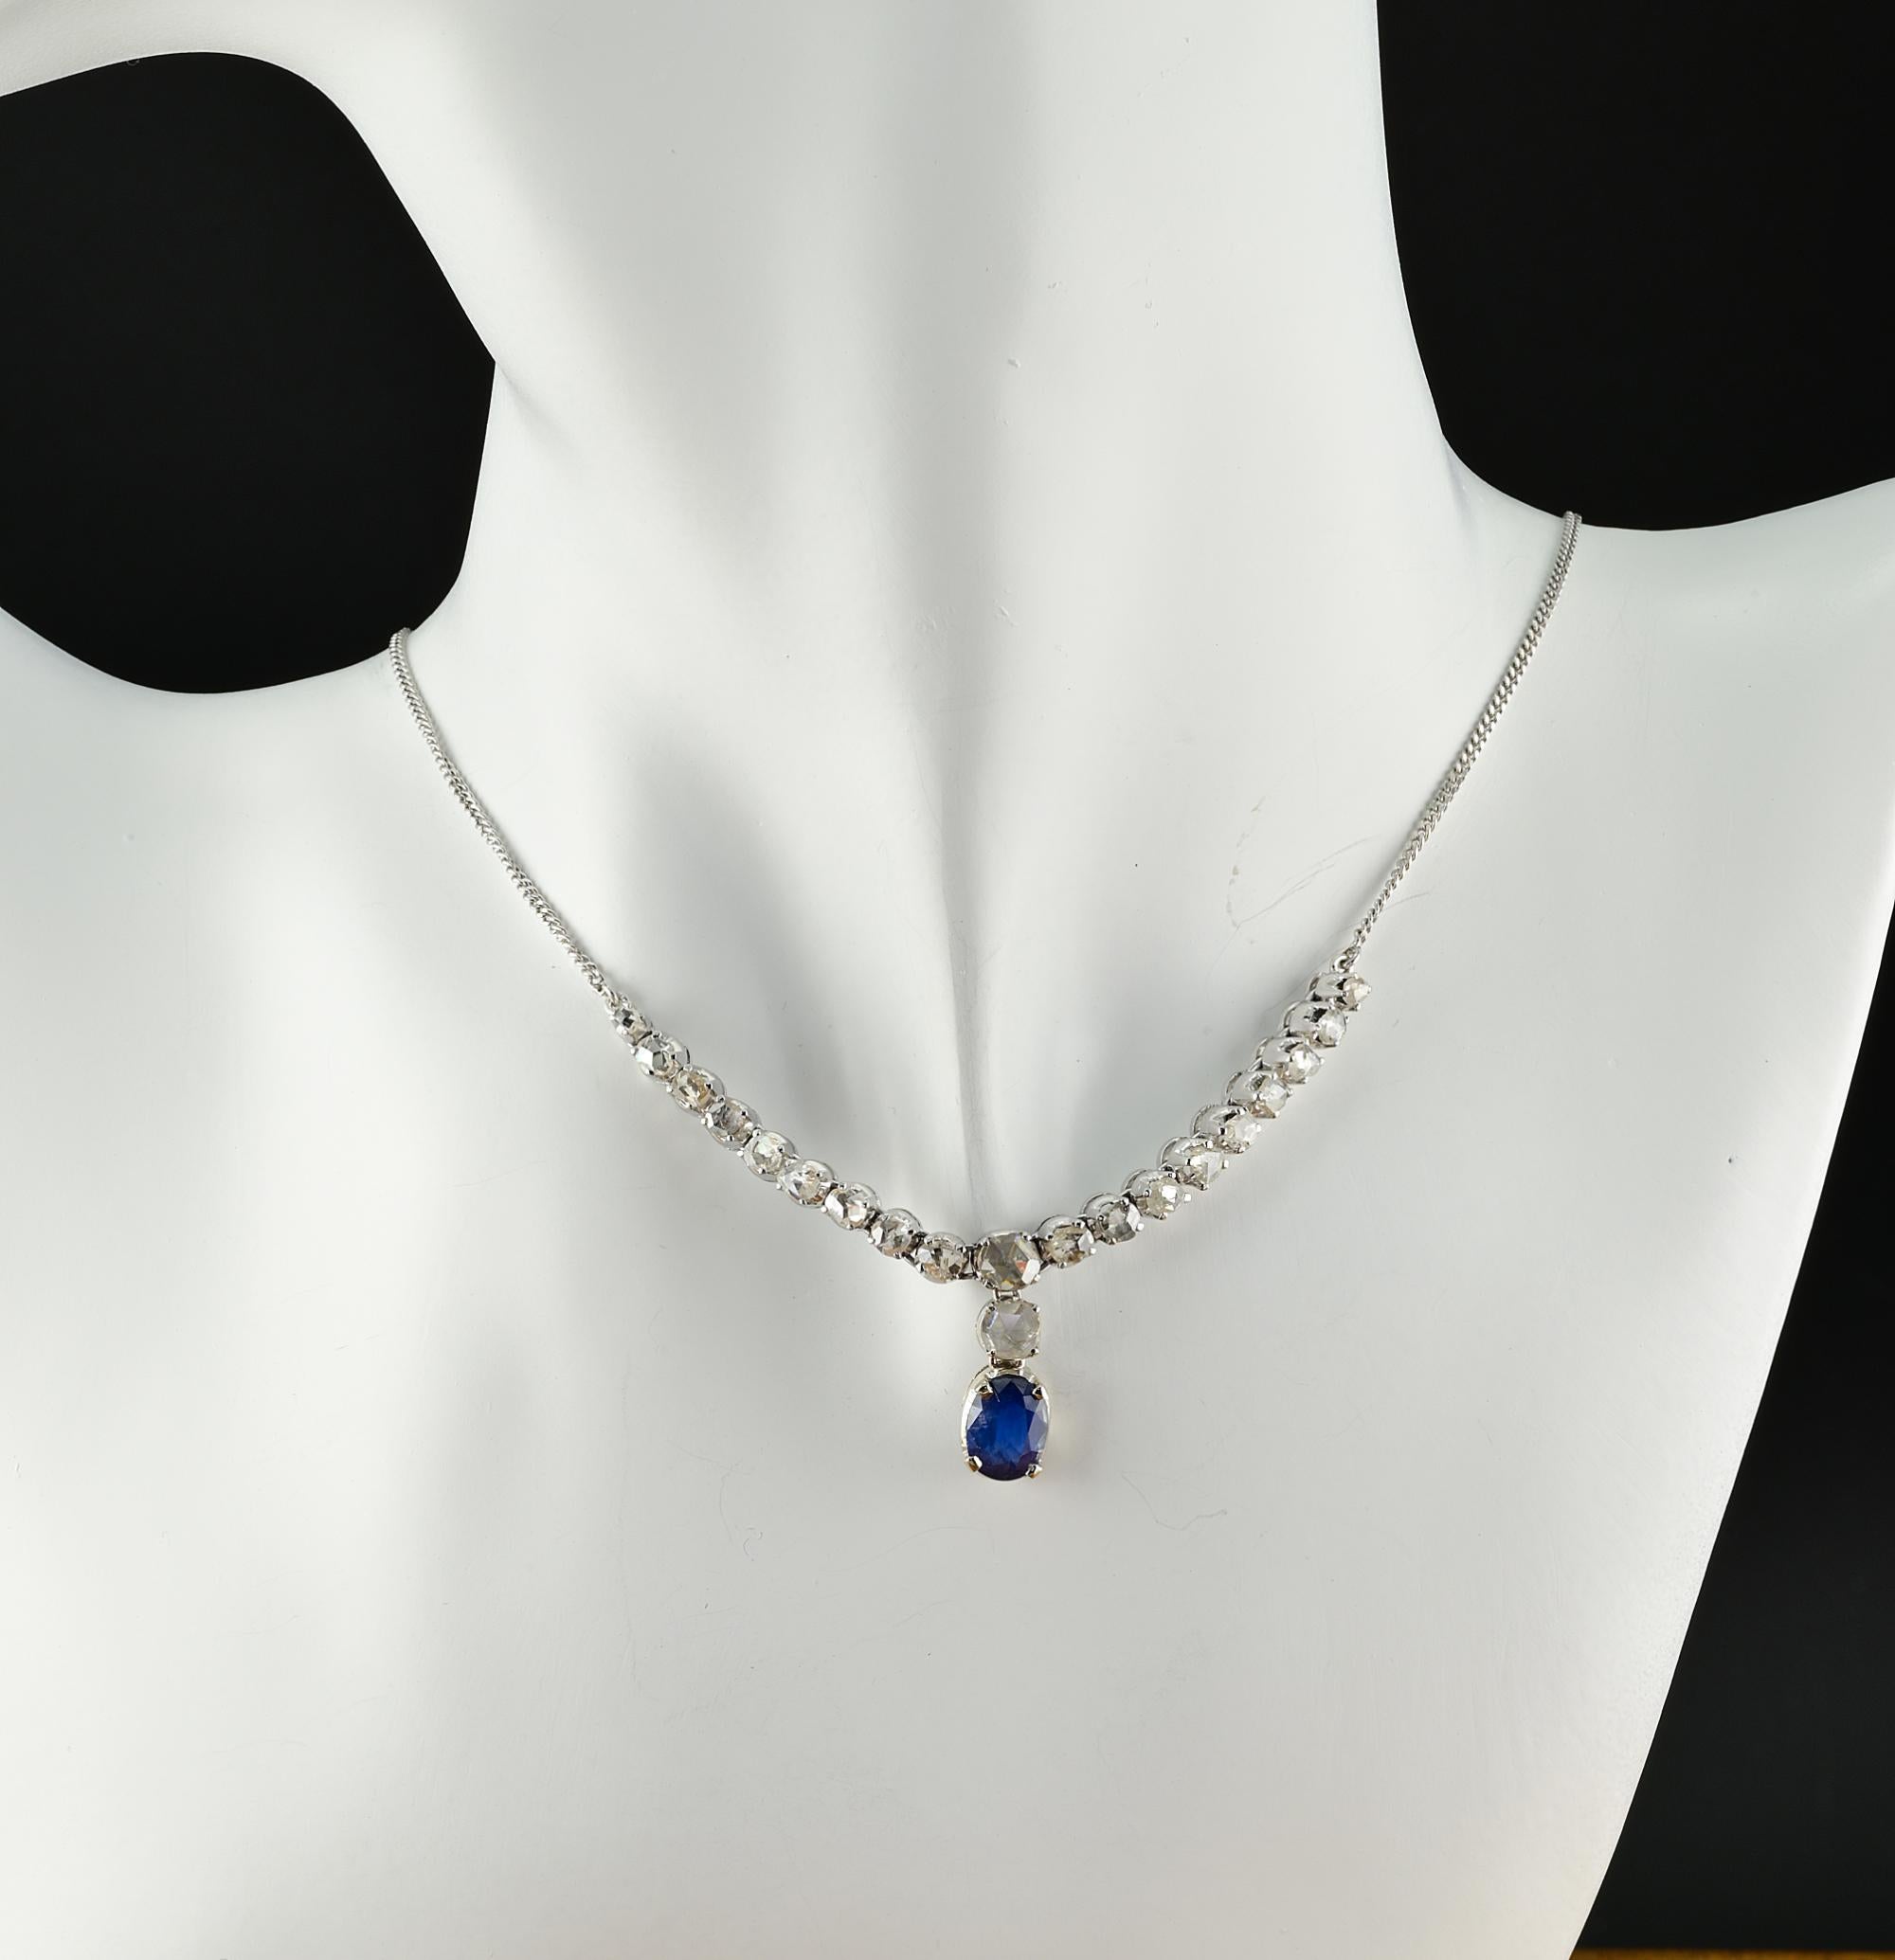 This lovely vintage necklace is 1940 ca
Beautifully hand crafted of solid 18 Kt white gold
Bearing Italian hallmarks from the period
Gorgeous half neck Rose cut Diamond line with centre finial drop set with Rose cut Diamonds and natural Sapphire for